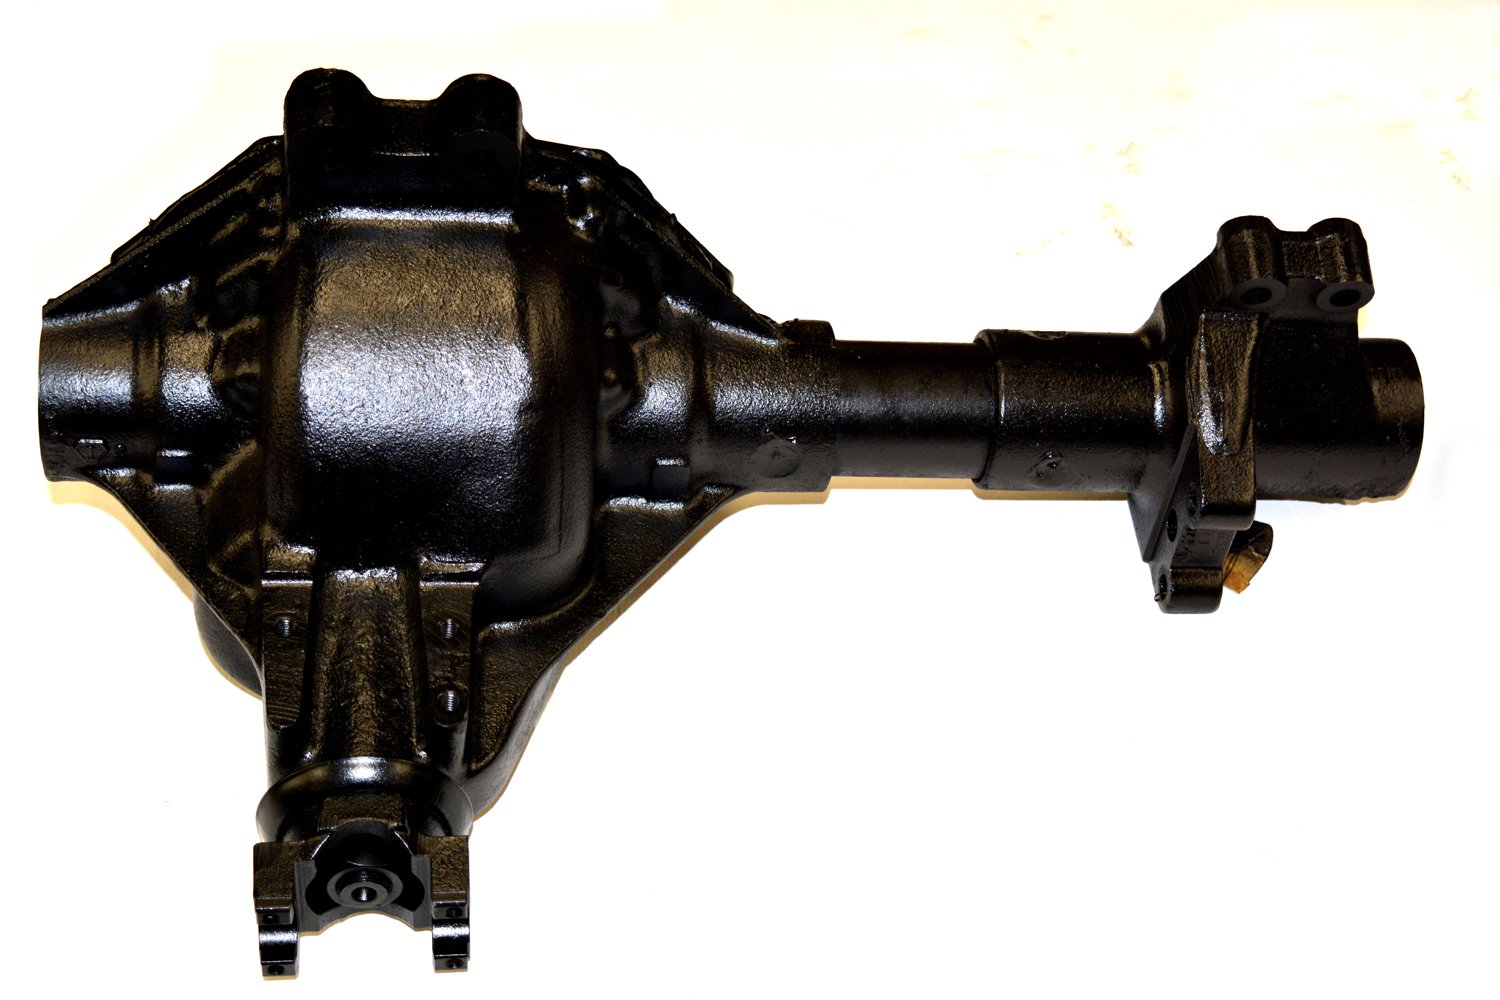 Remanufactured Axle Assembly for Chrysler 7.25 IFS 93-96 Dodge Dakota 3.23 Ratio